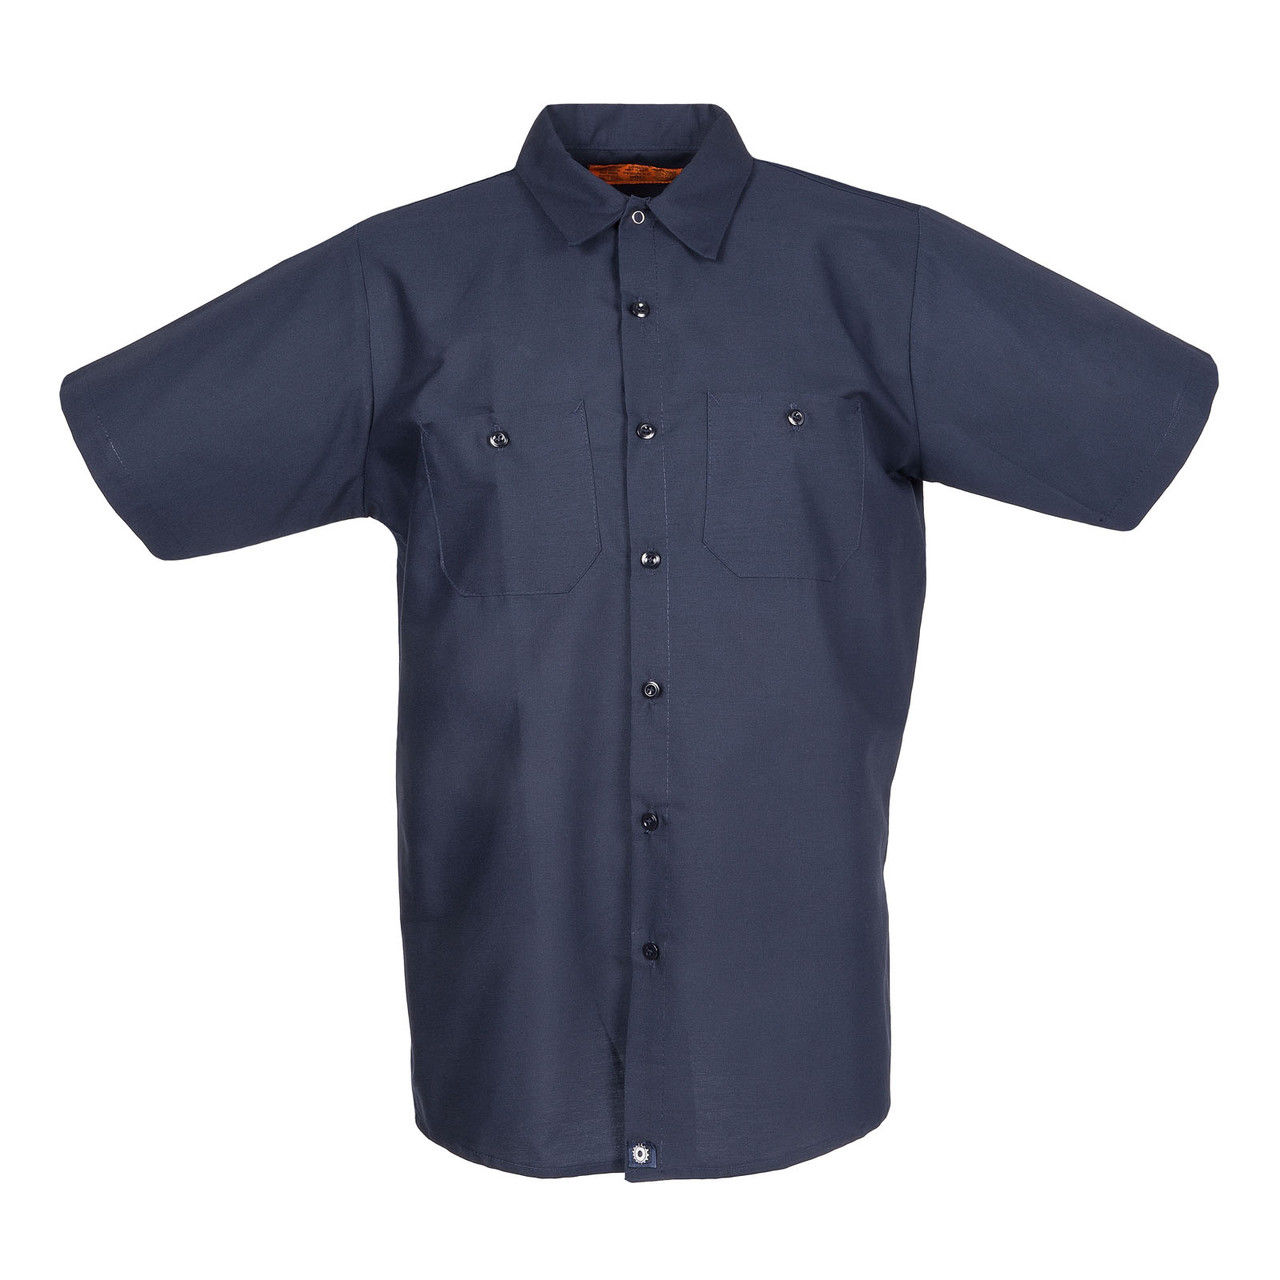 What's the shipping info for the S12NV mens navy blue short sleeve shirt?